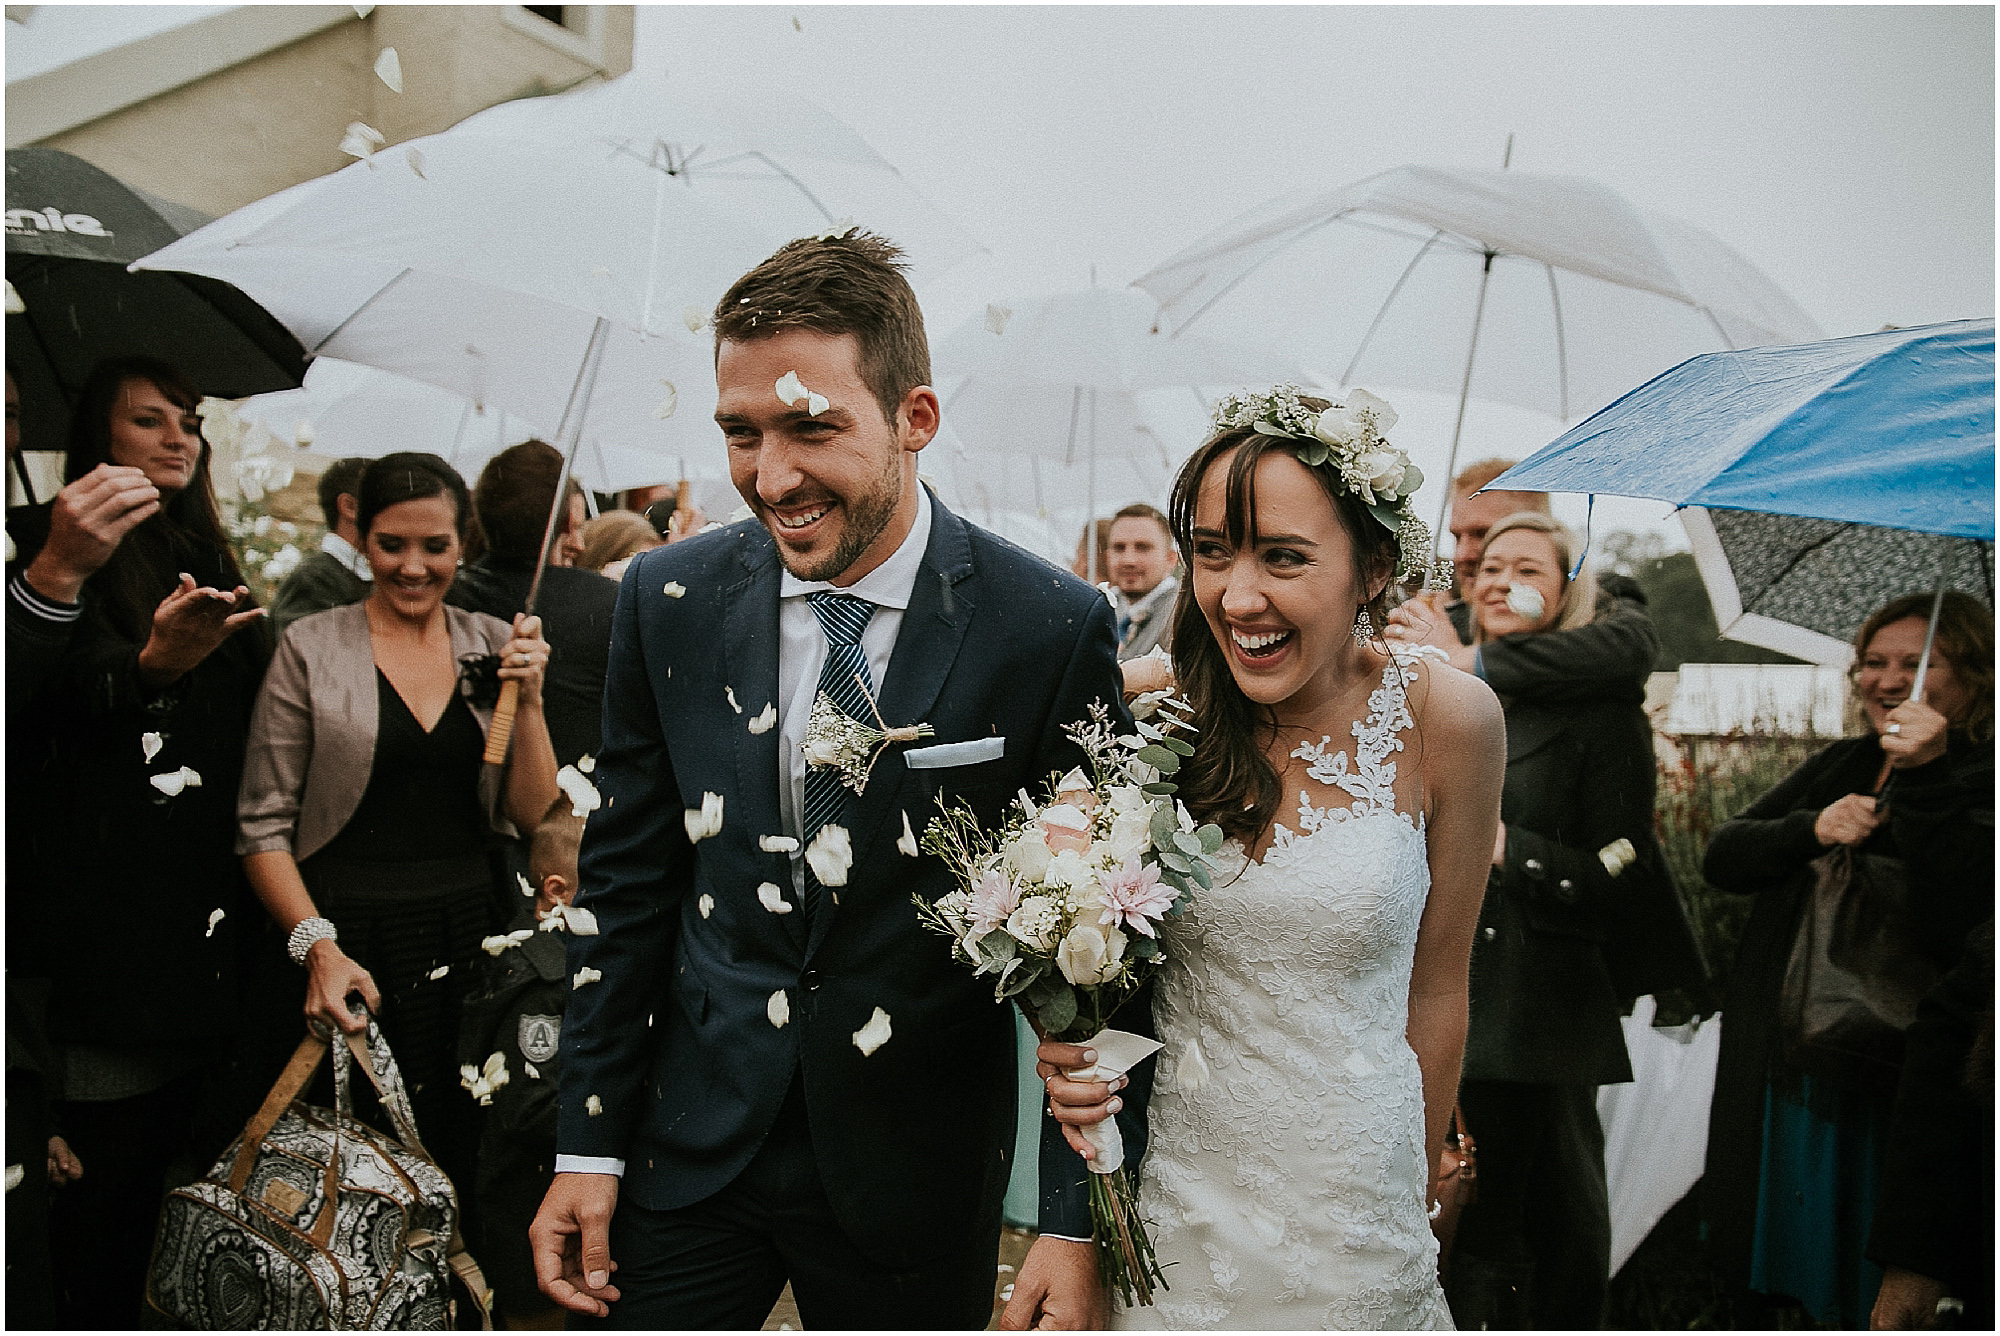 Outdoor-Forest-Destination-Wedding-Photographer-Maryke-Albertyn-Photography-Looks-Like-Film-Authentic-Alternative-Cape-Town-Pretoria-Silver-Sixpence-Dullstroom-bride-and-groom-confetti